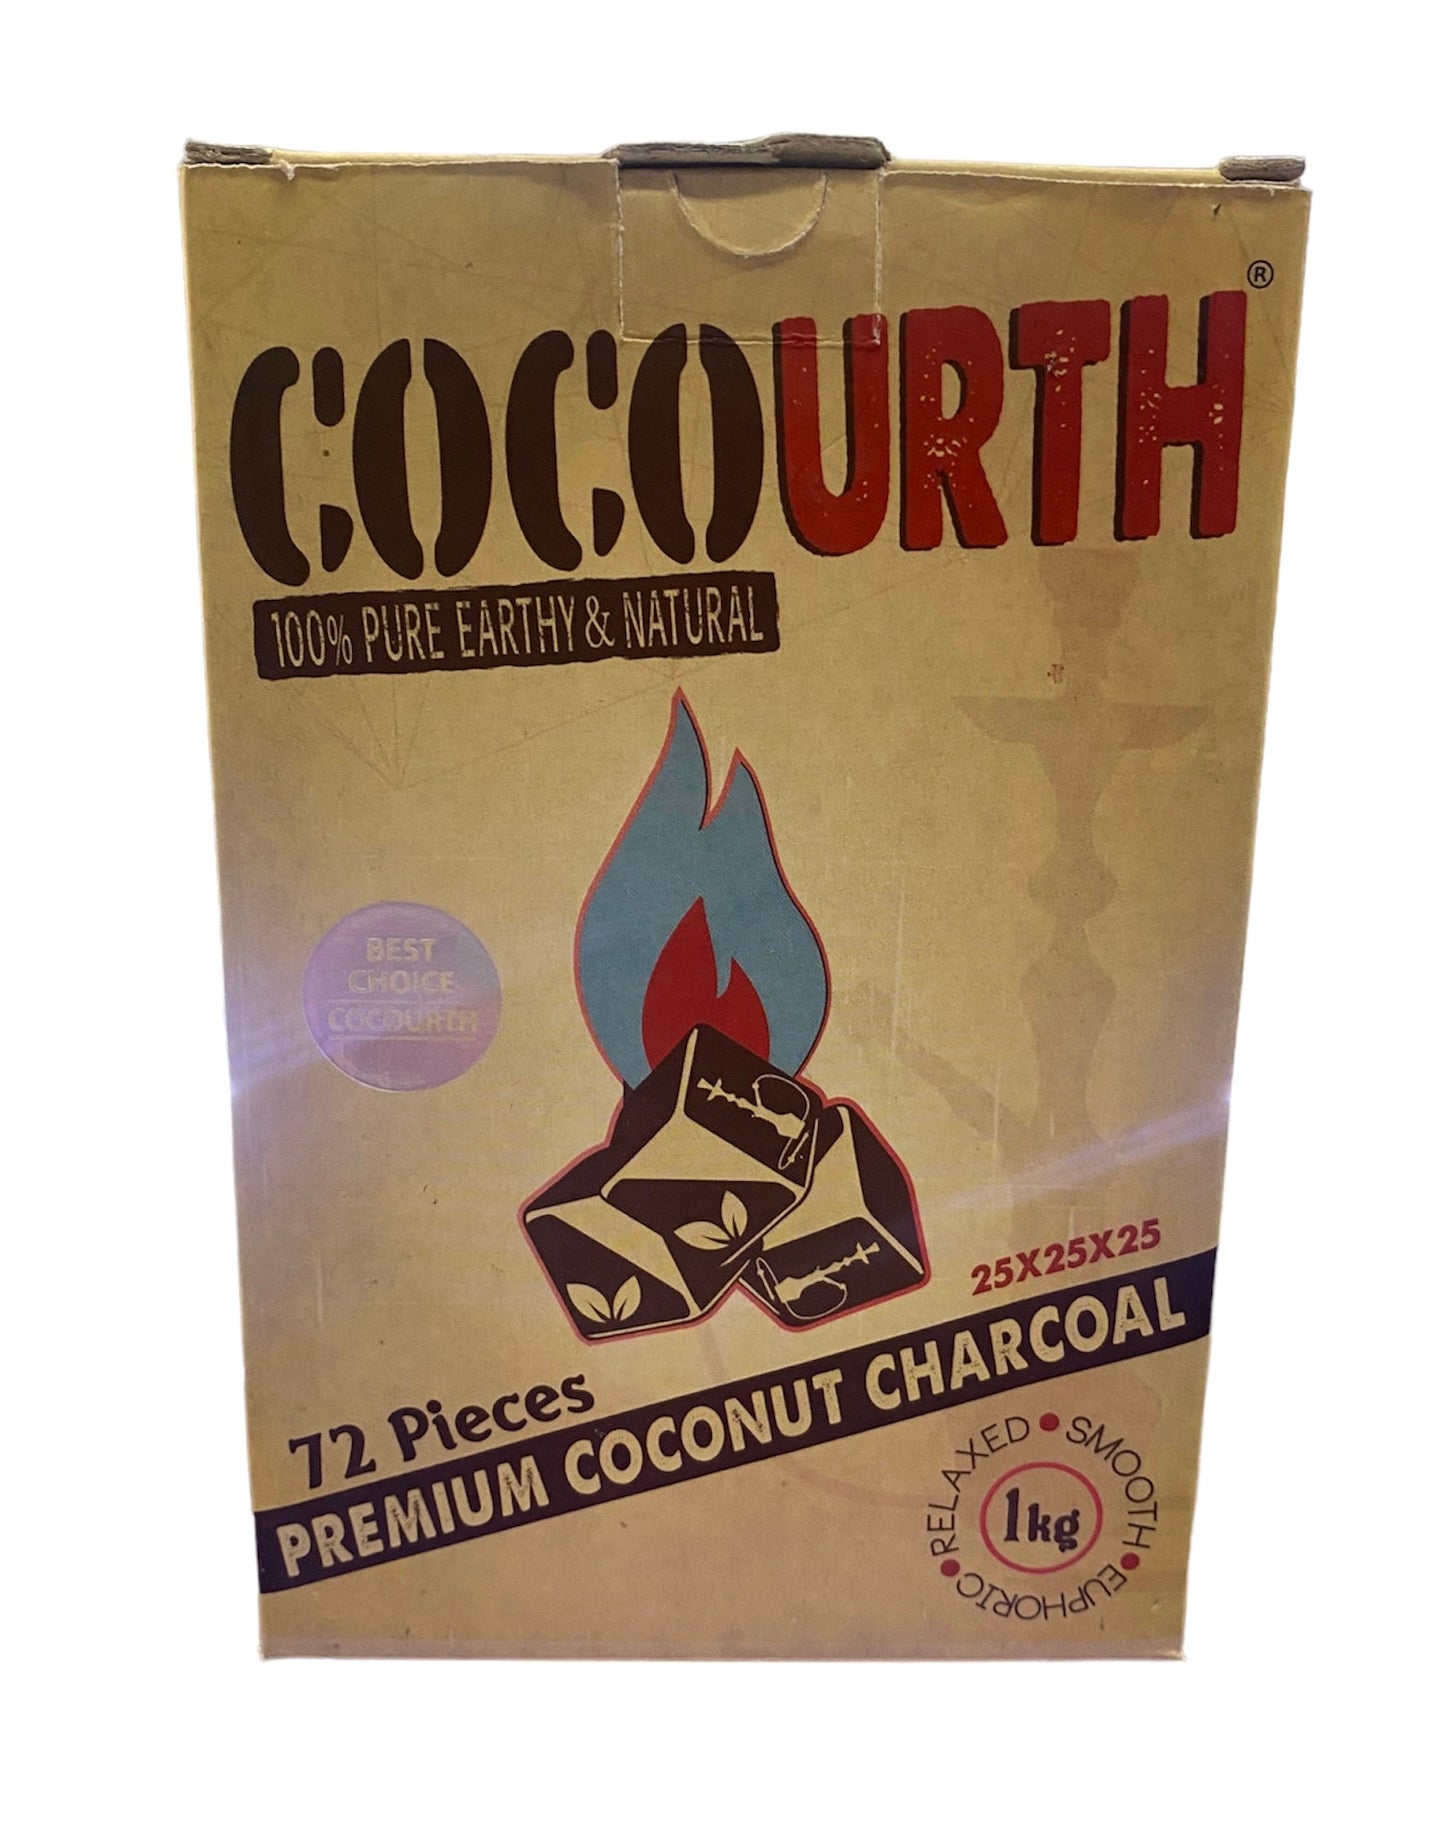 Cocourth Coconut Charcoal (1kg)